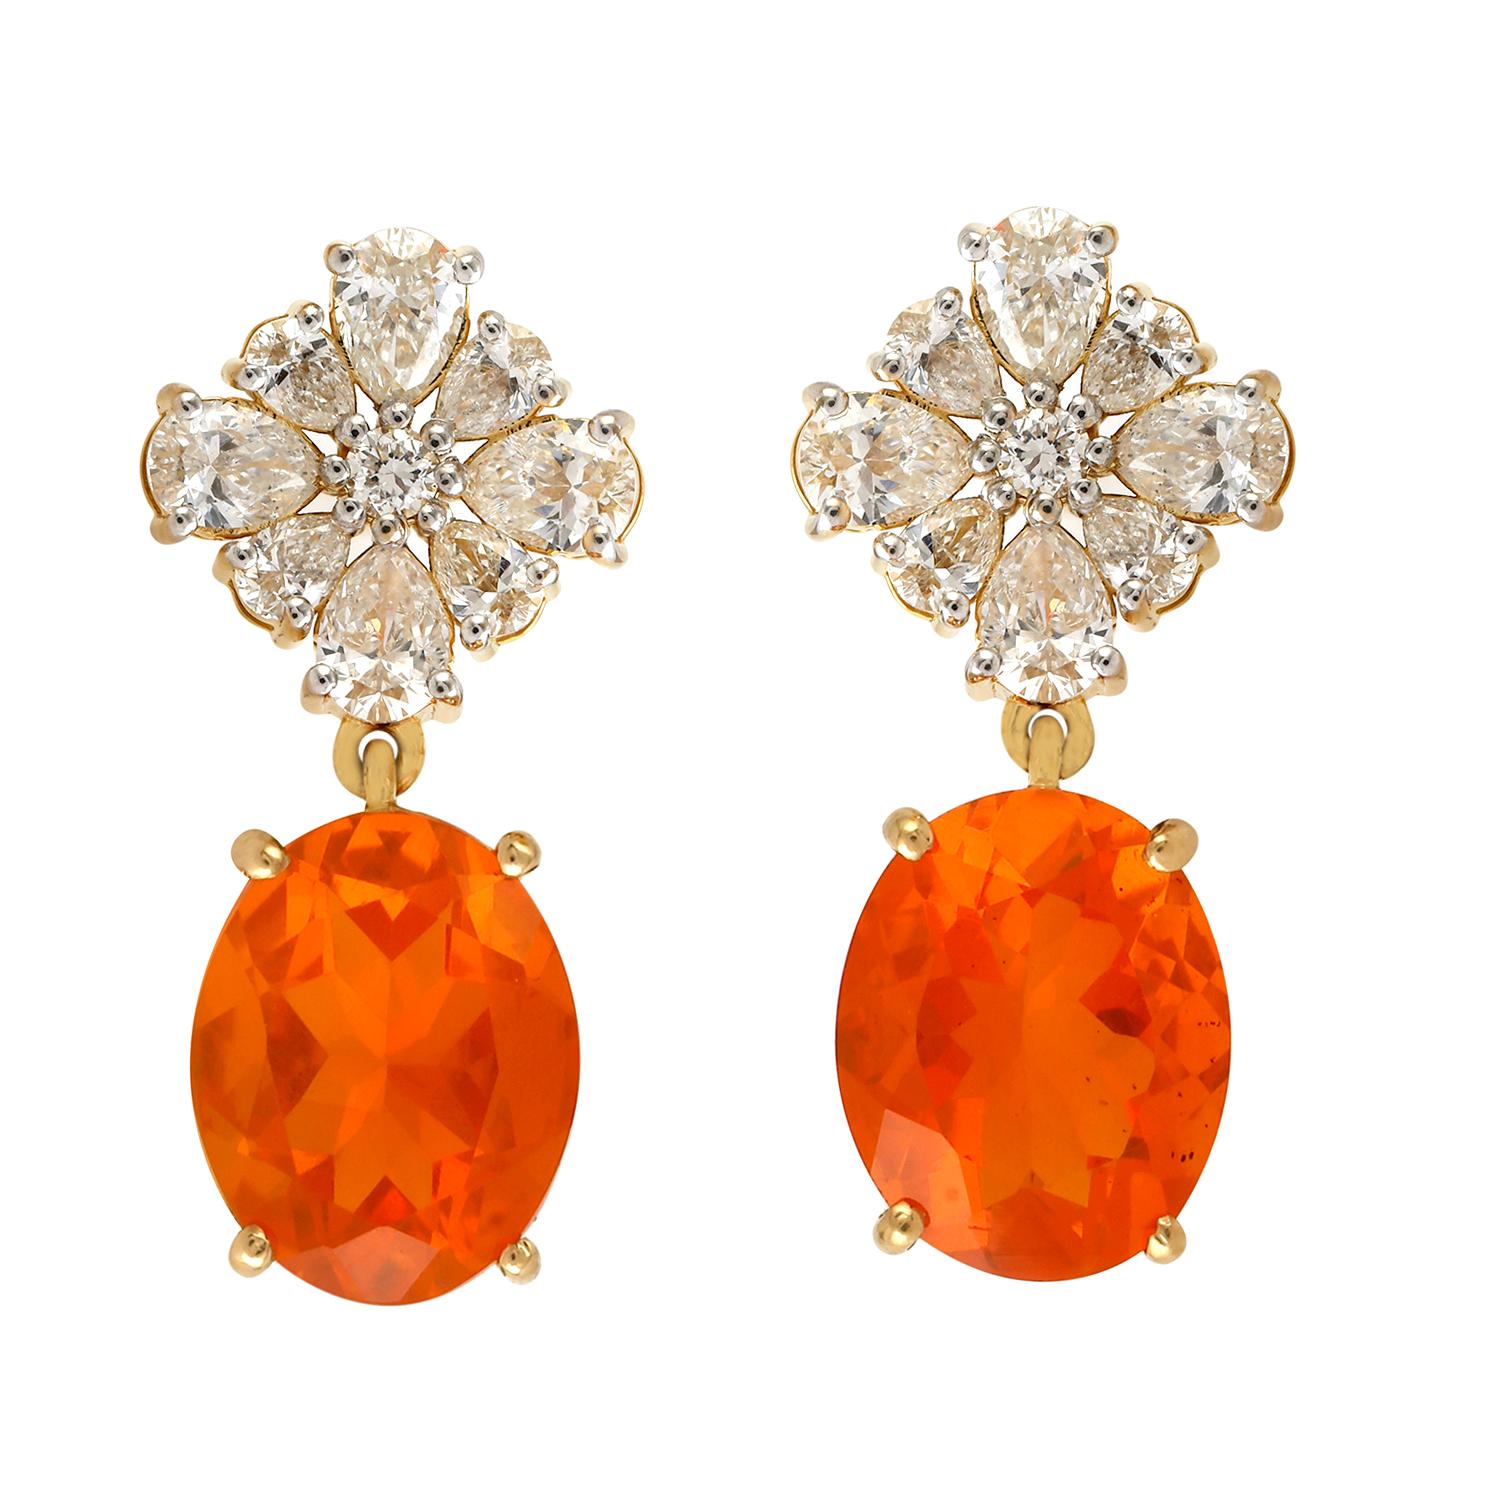 Contemporary Oval Shaped Fire Opal Dangle Earrings Accented With Diamonds In 18k Yellow Gold For Sale